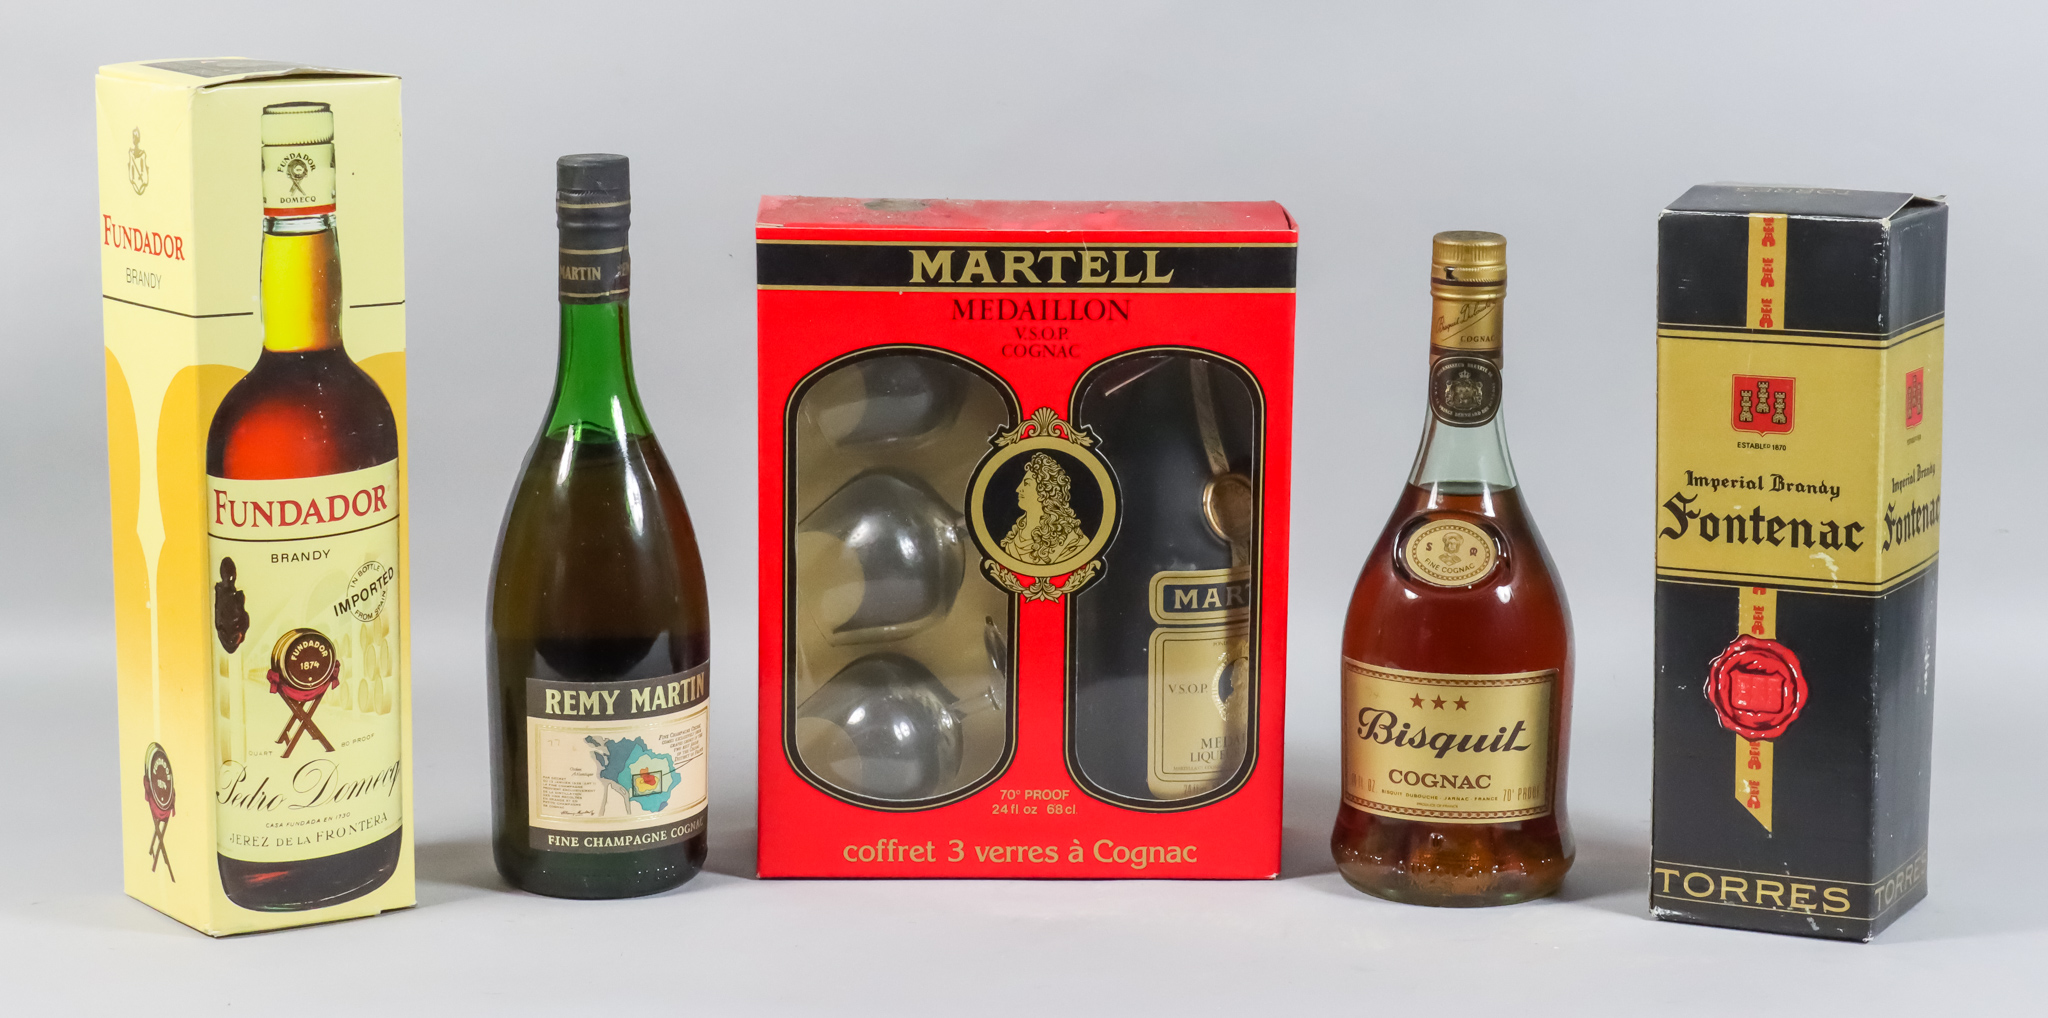 Six bottles of Janneau V.S.O.P. Grand Armagnac, six bottles of Bisquit "3 Star" cognac, and six